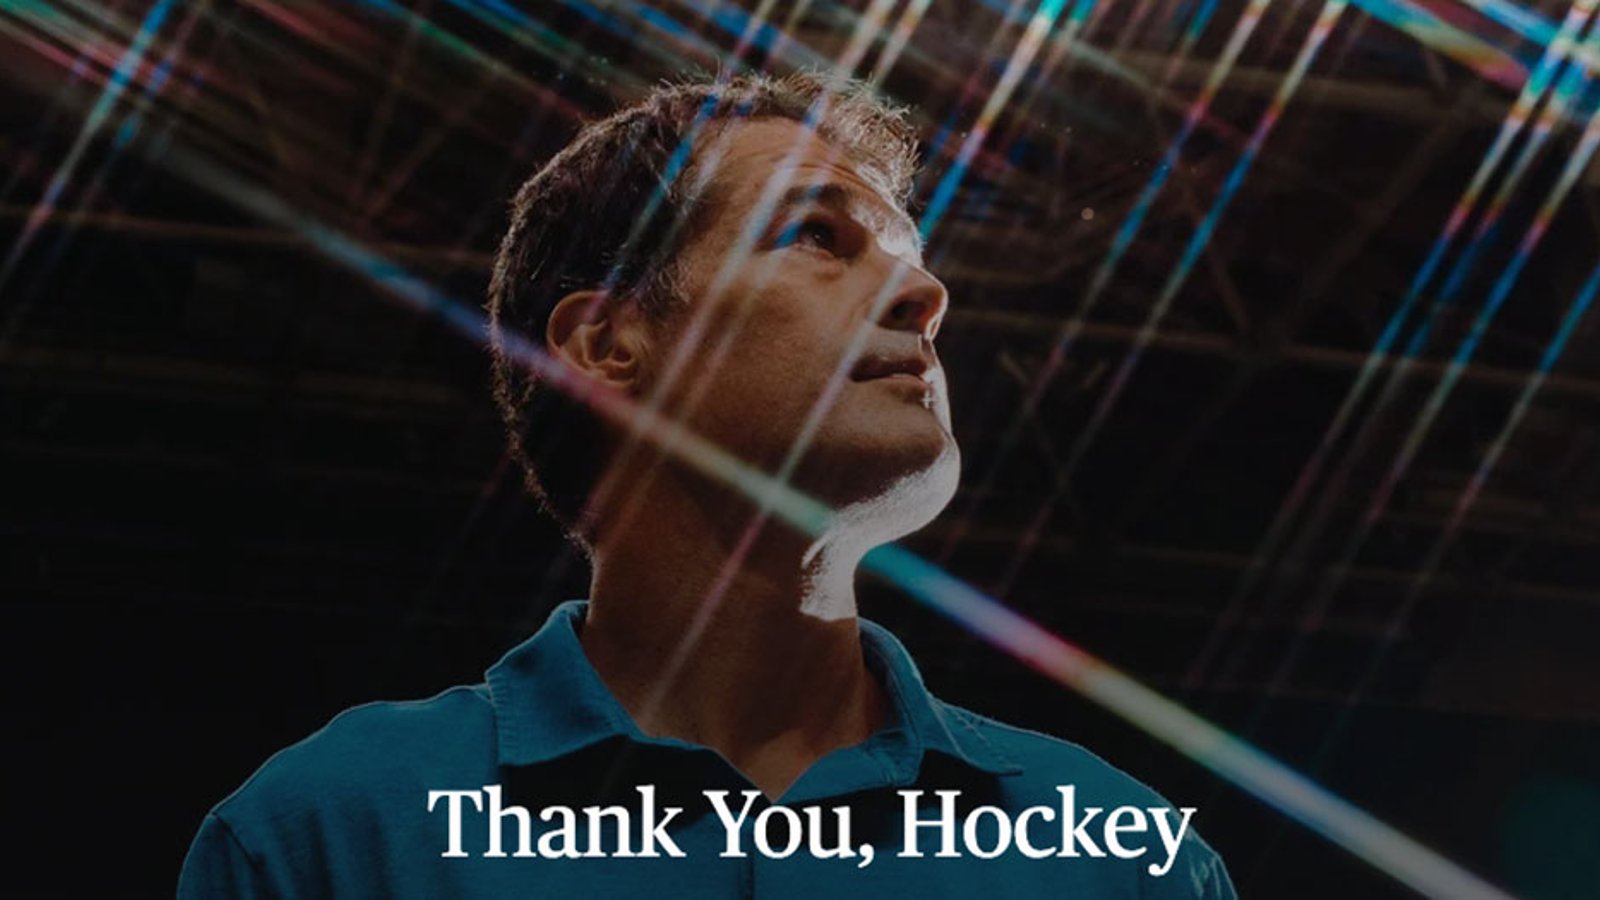 Patrick Marleau officially announces his retirement in touching article for The Players' Tribune